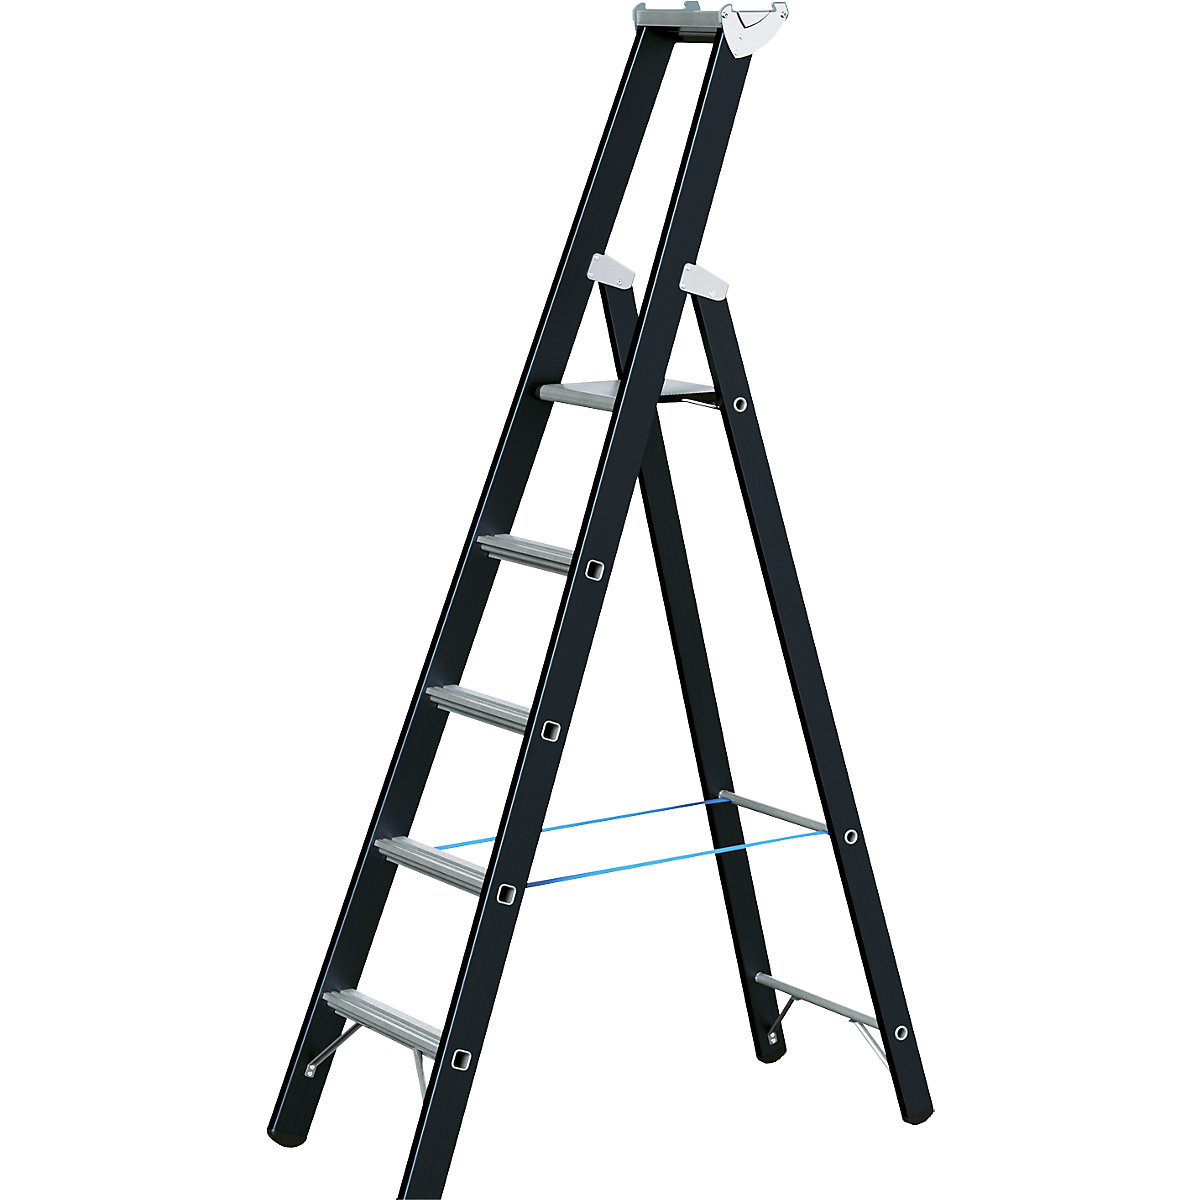 Heavy duty step ladder – ZARGES, single sided, 5 rungs incl. platform-3